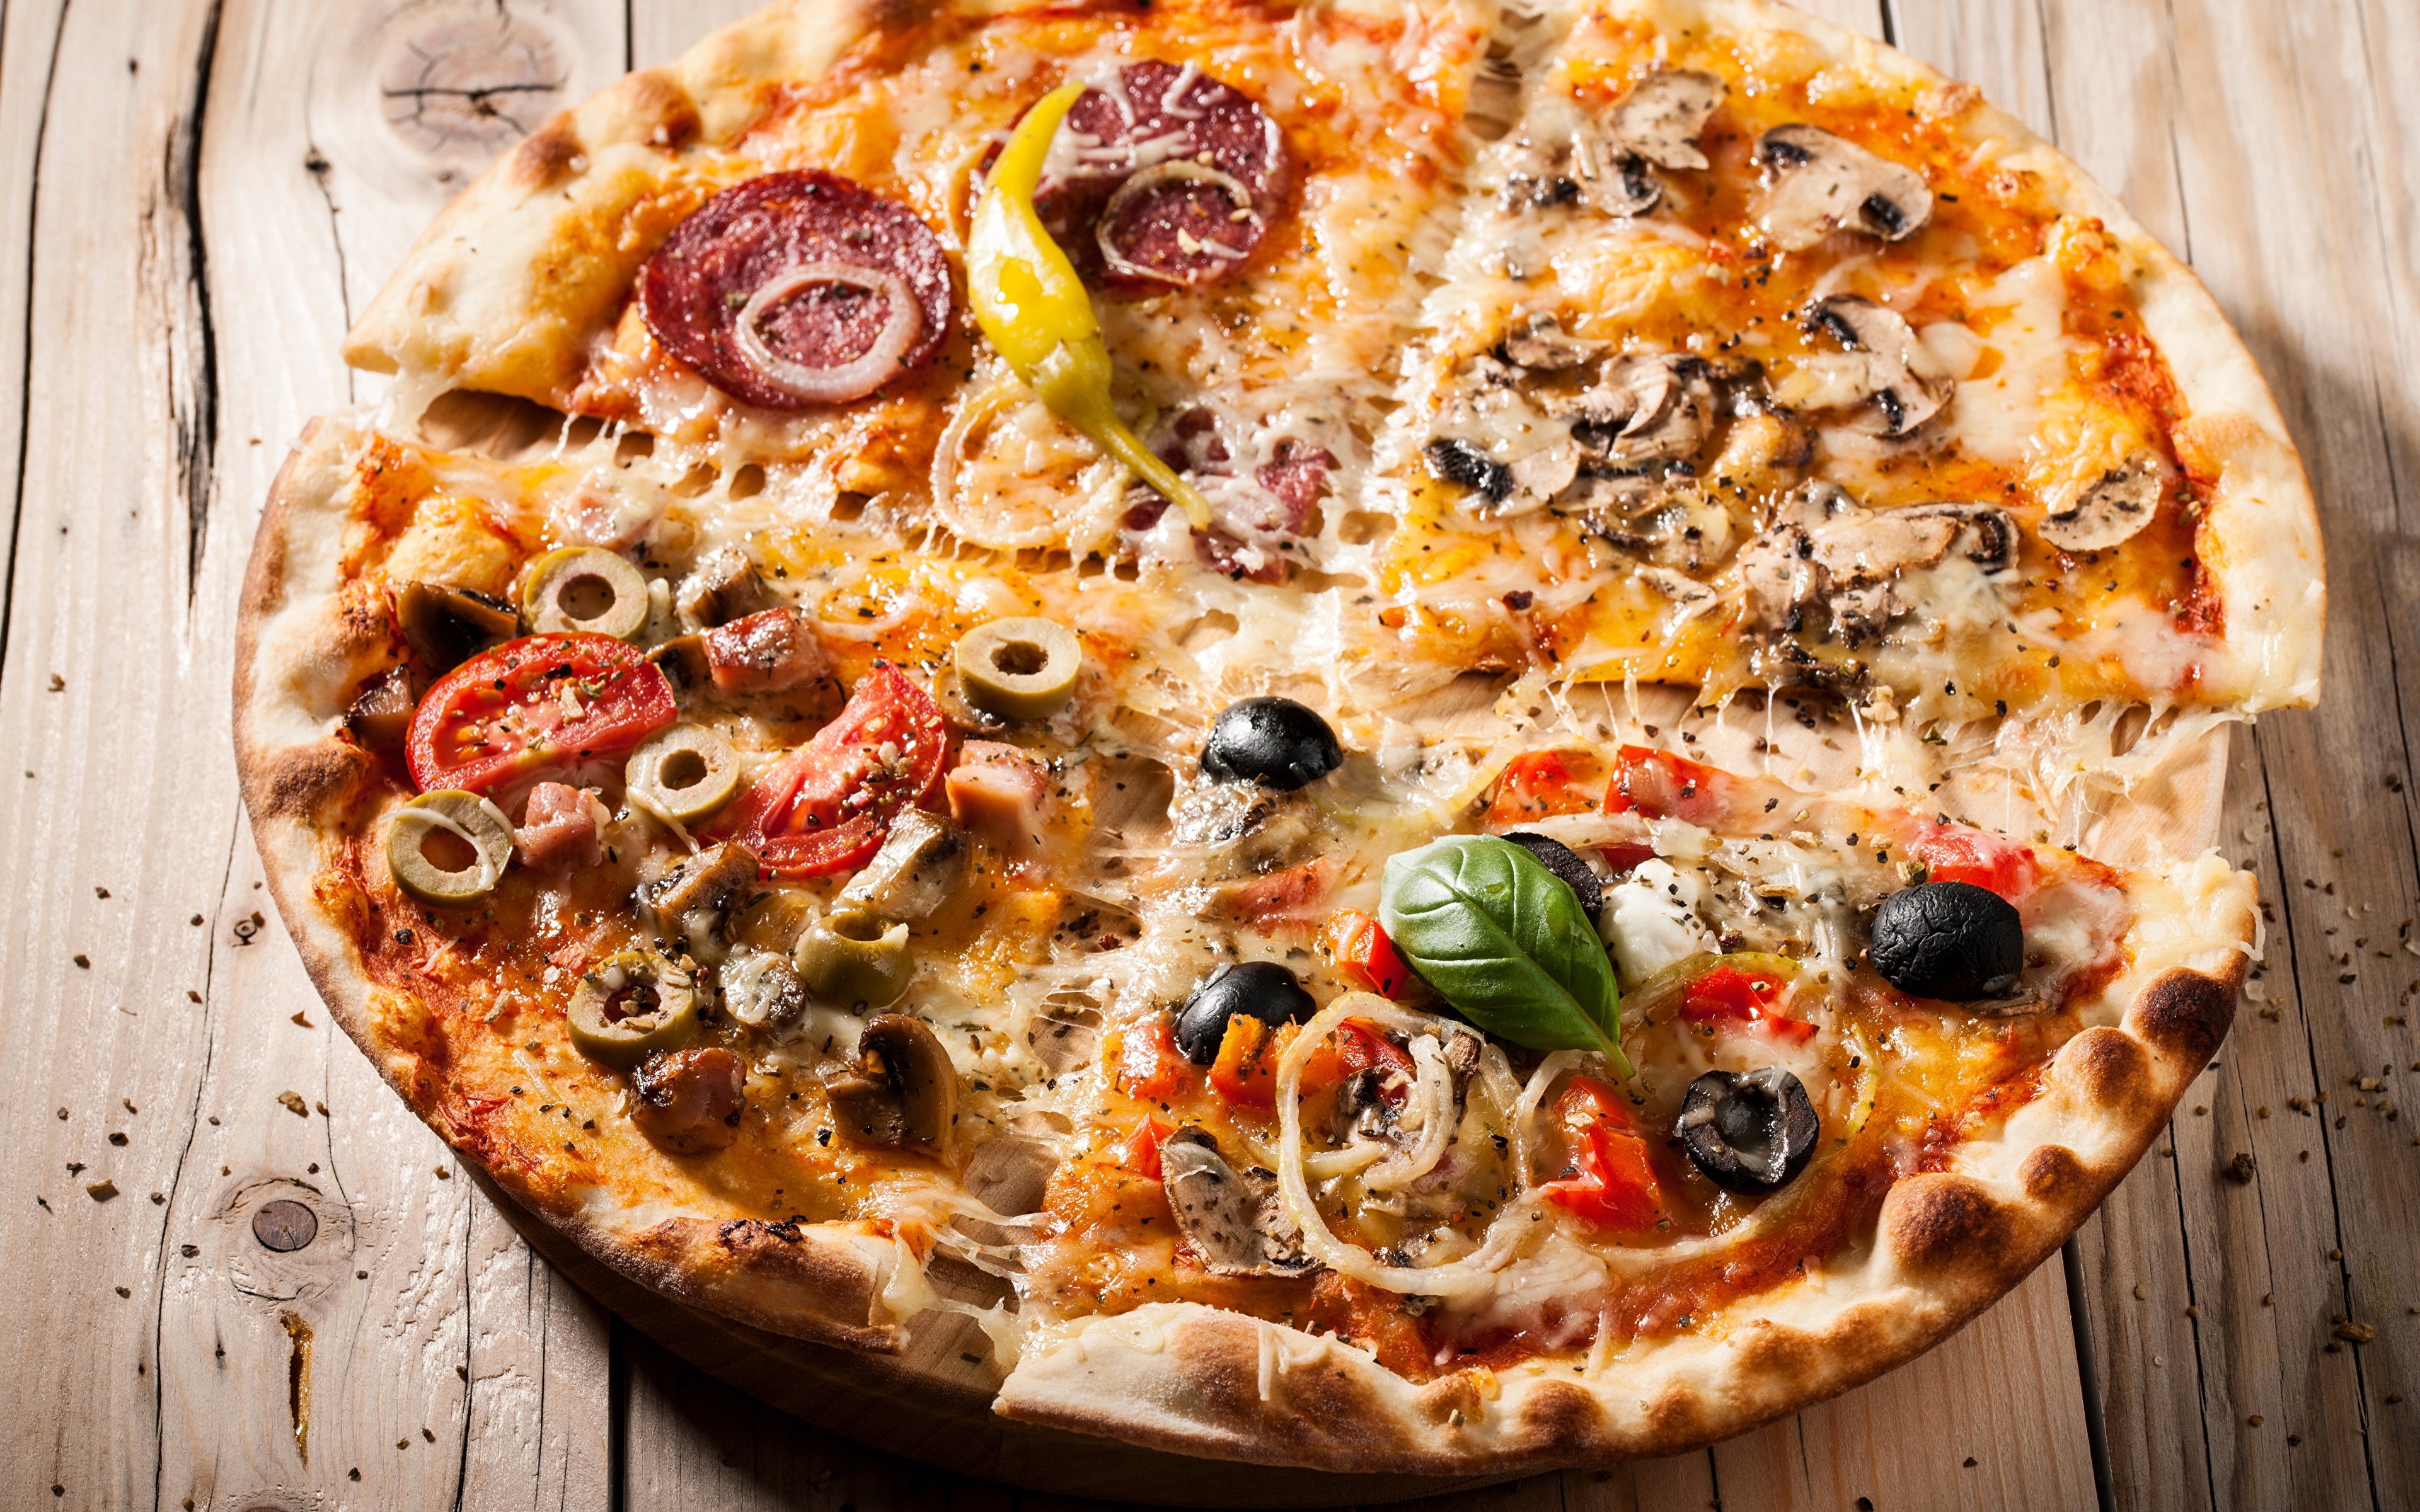 DeliciousRound: Pizza taste and convenience delivered directly to you!